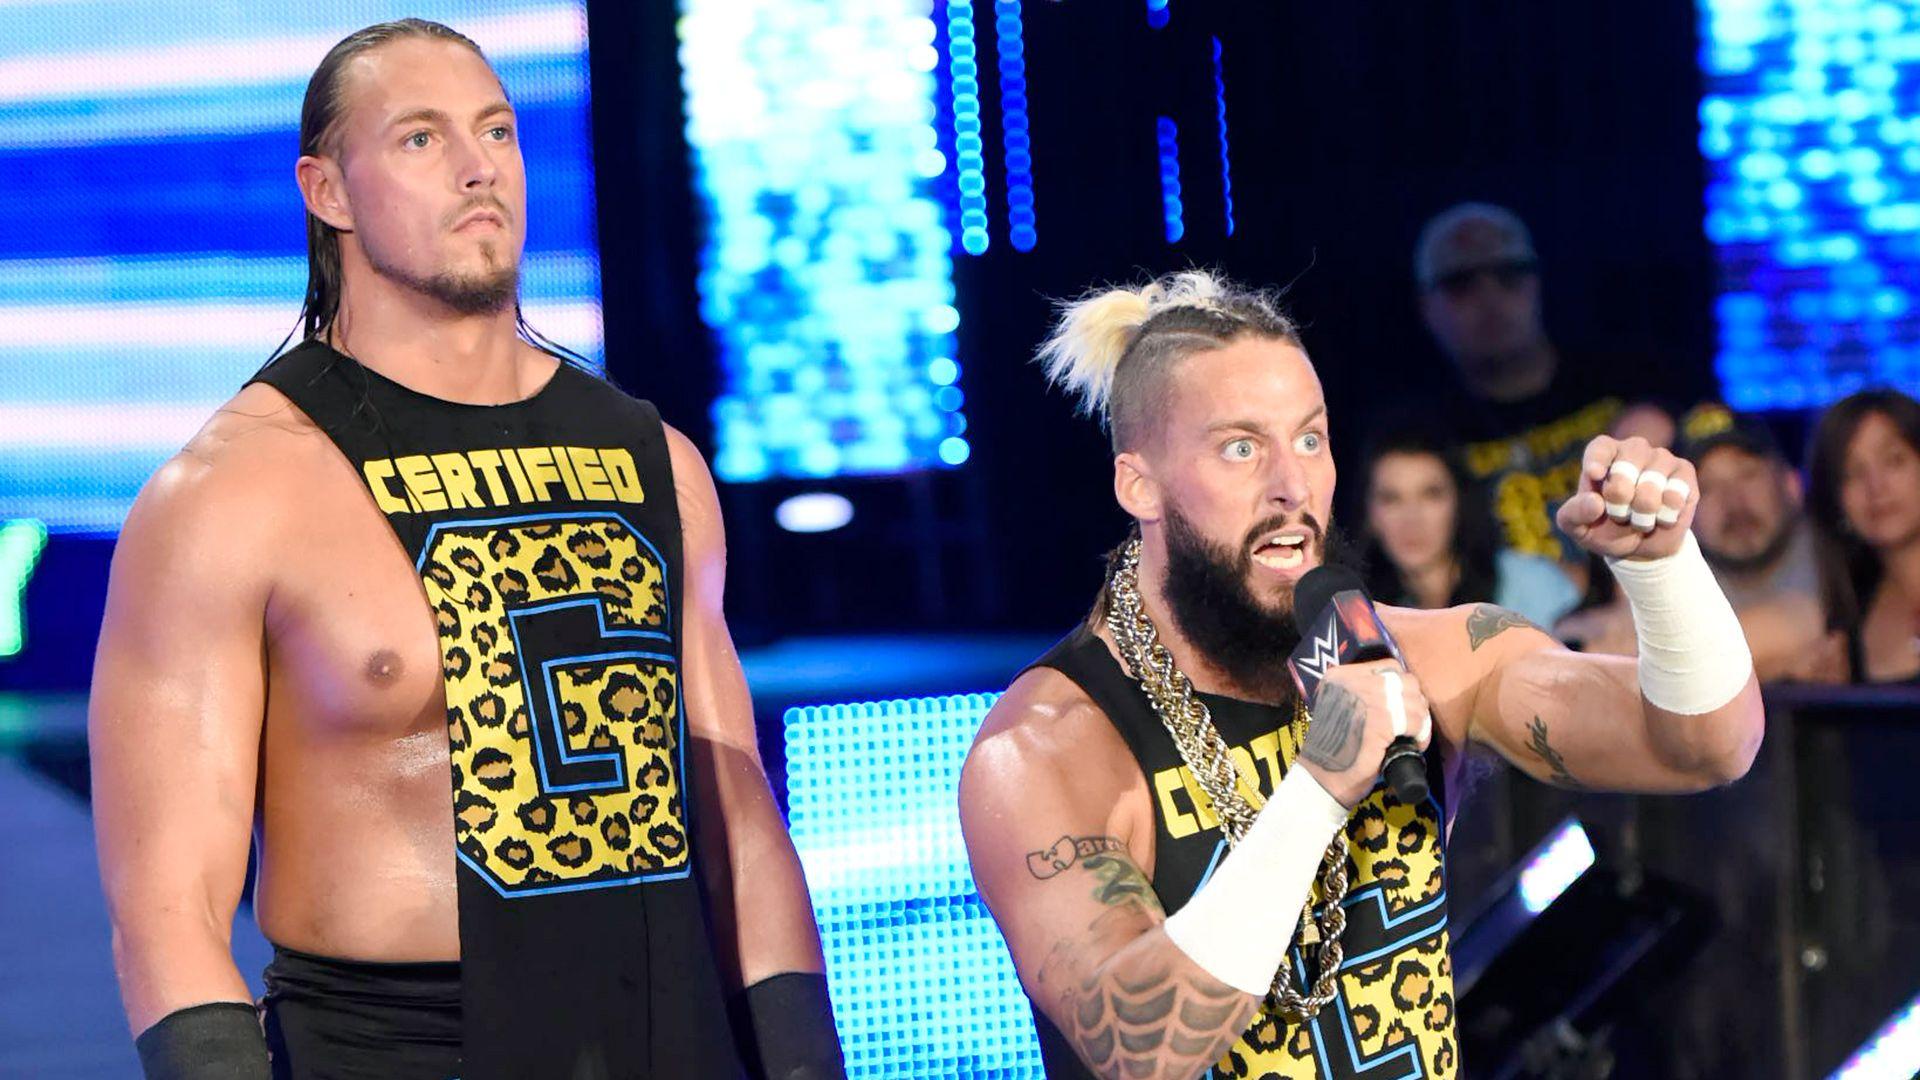 Enzo Amore Certified G image. Beautiful image HD Picture